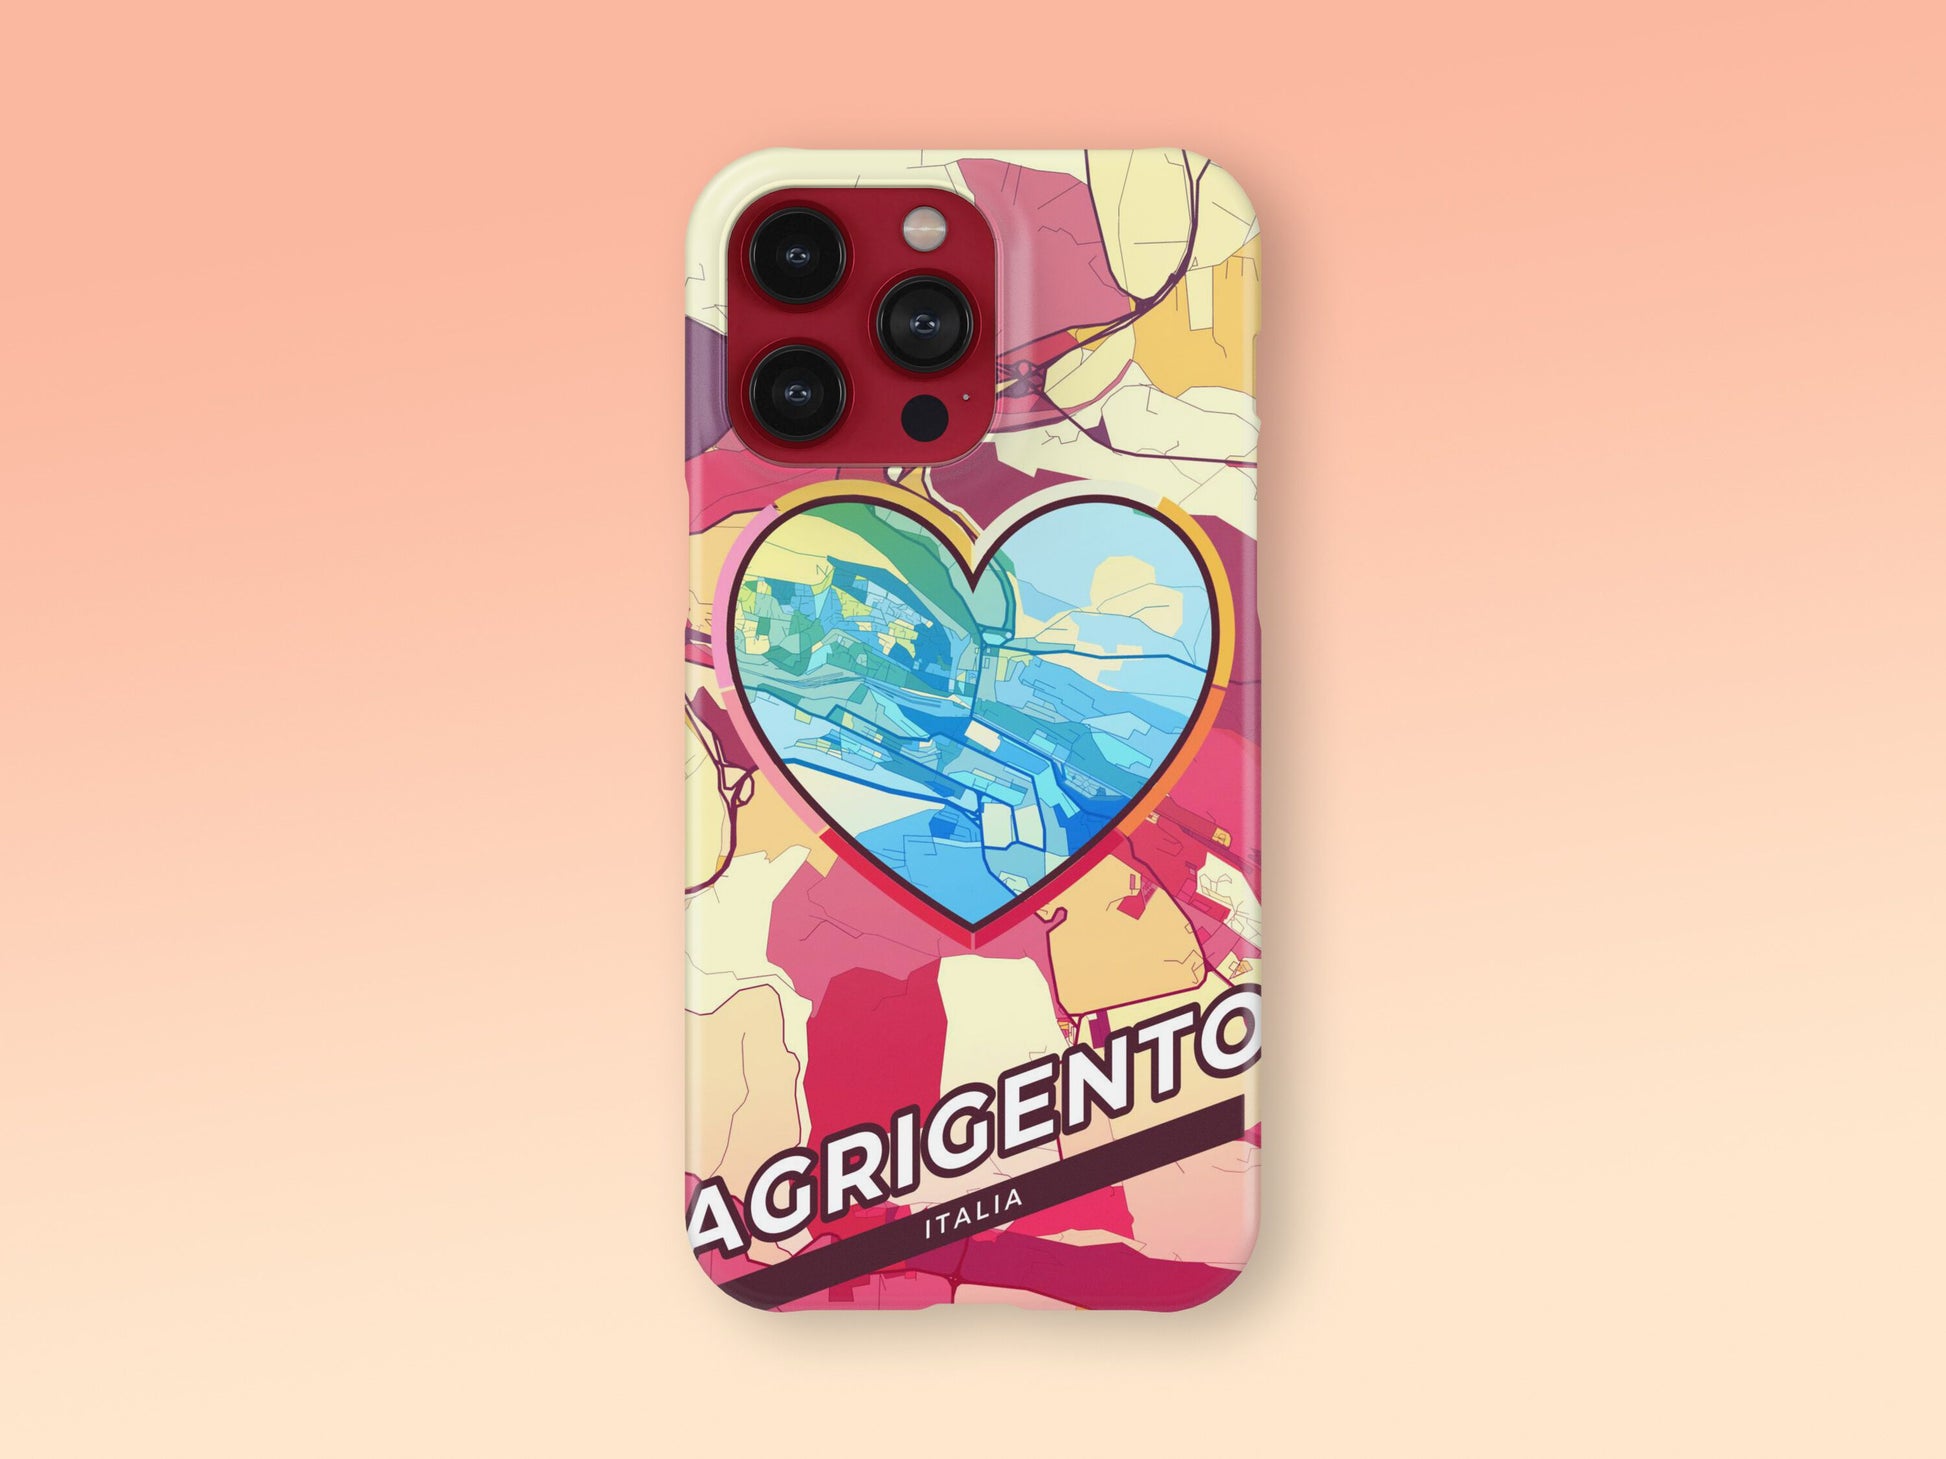 Agrigento Italy slim phone case with colorful icon. Birthday, wedding or housewarming gift. Couple match cases. 2